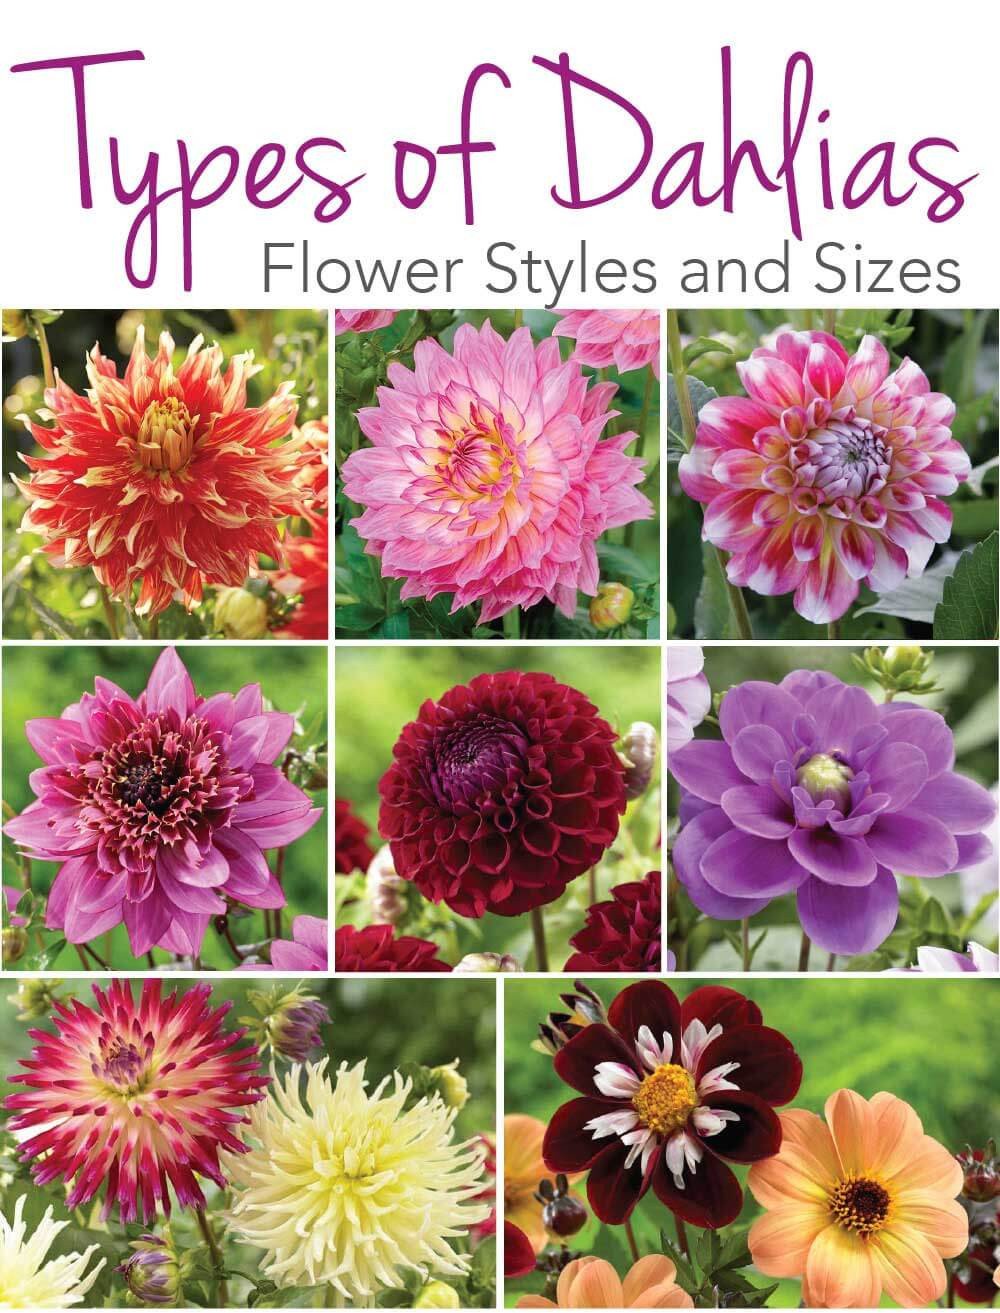 Types of Dahlias: Flower Styles and Sizes